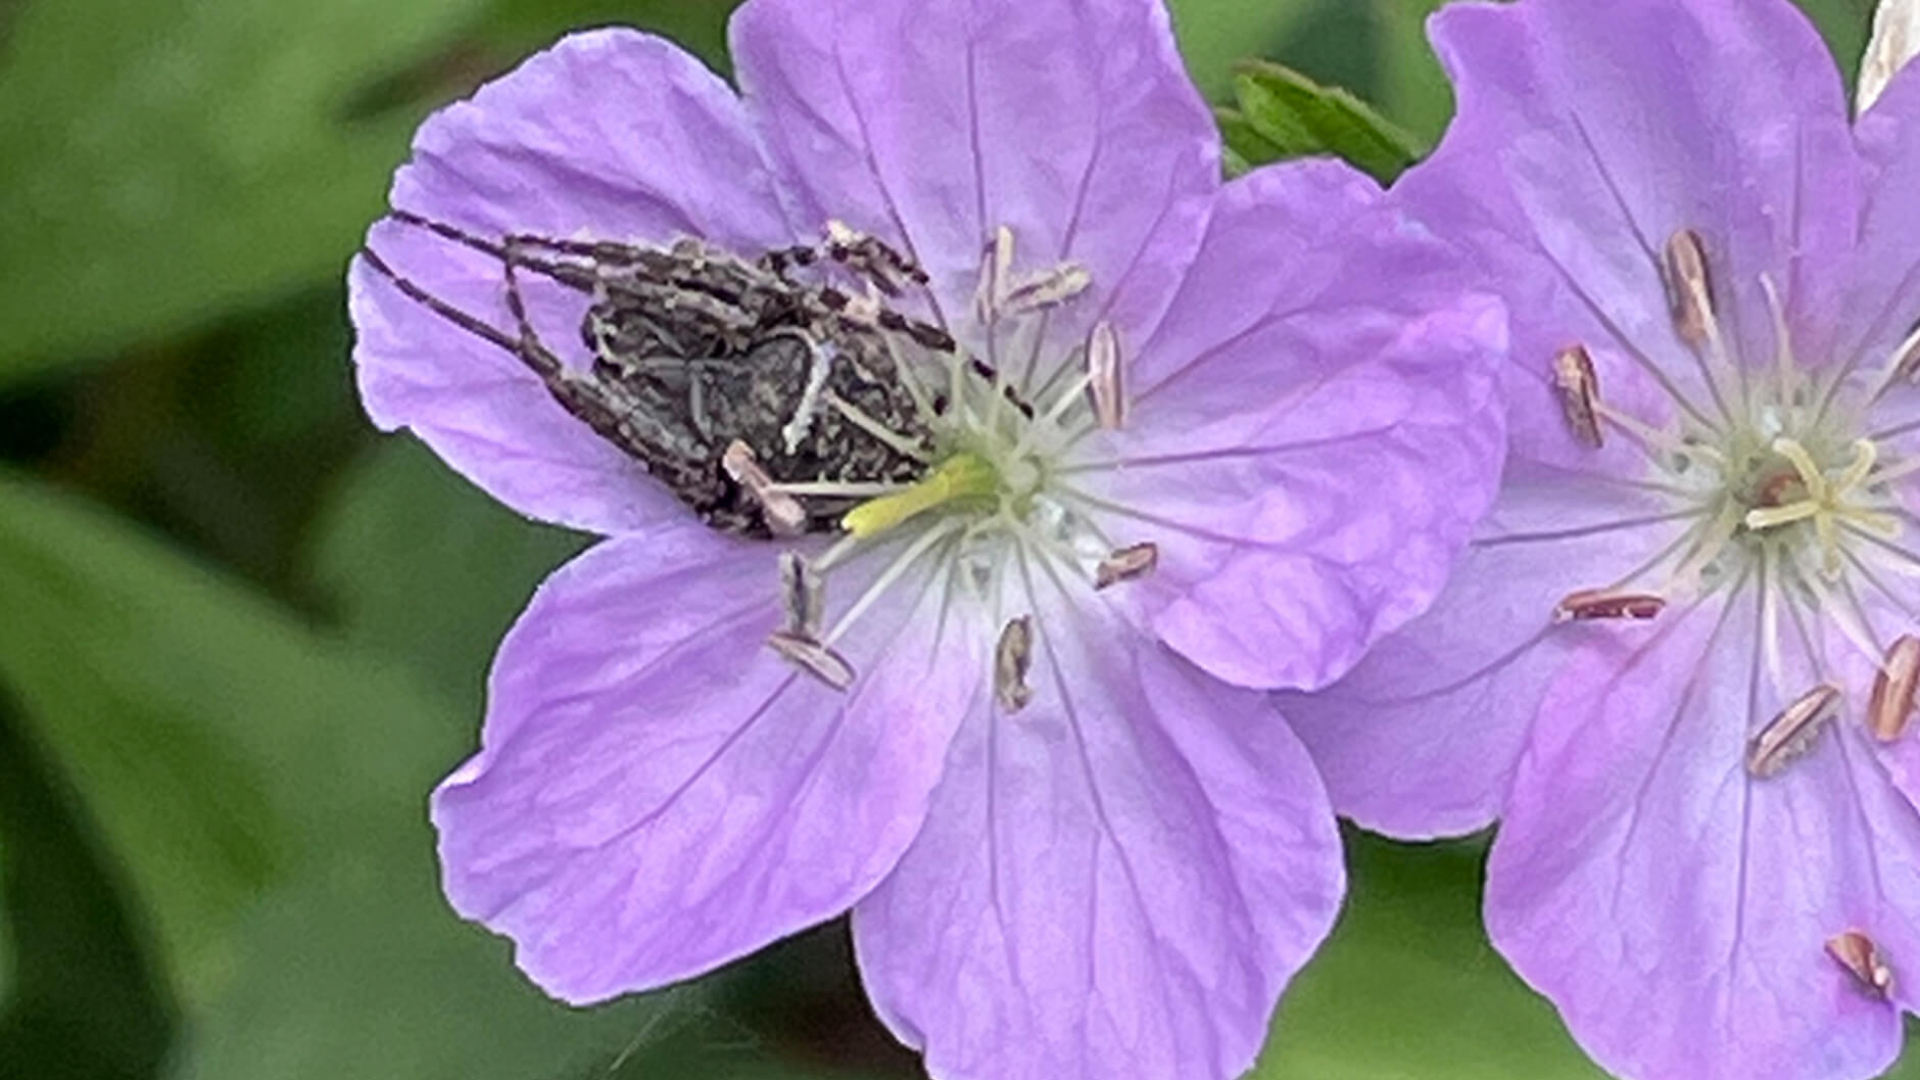 Gray cross spider. Look closely and you can see a thread of spider silk extending from the bottom left petal of the wild geranium.